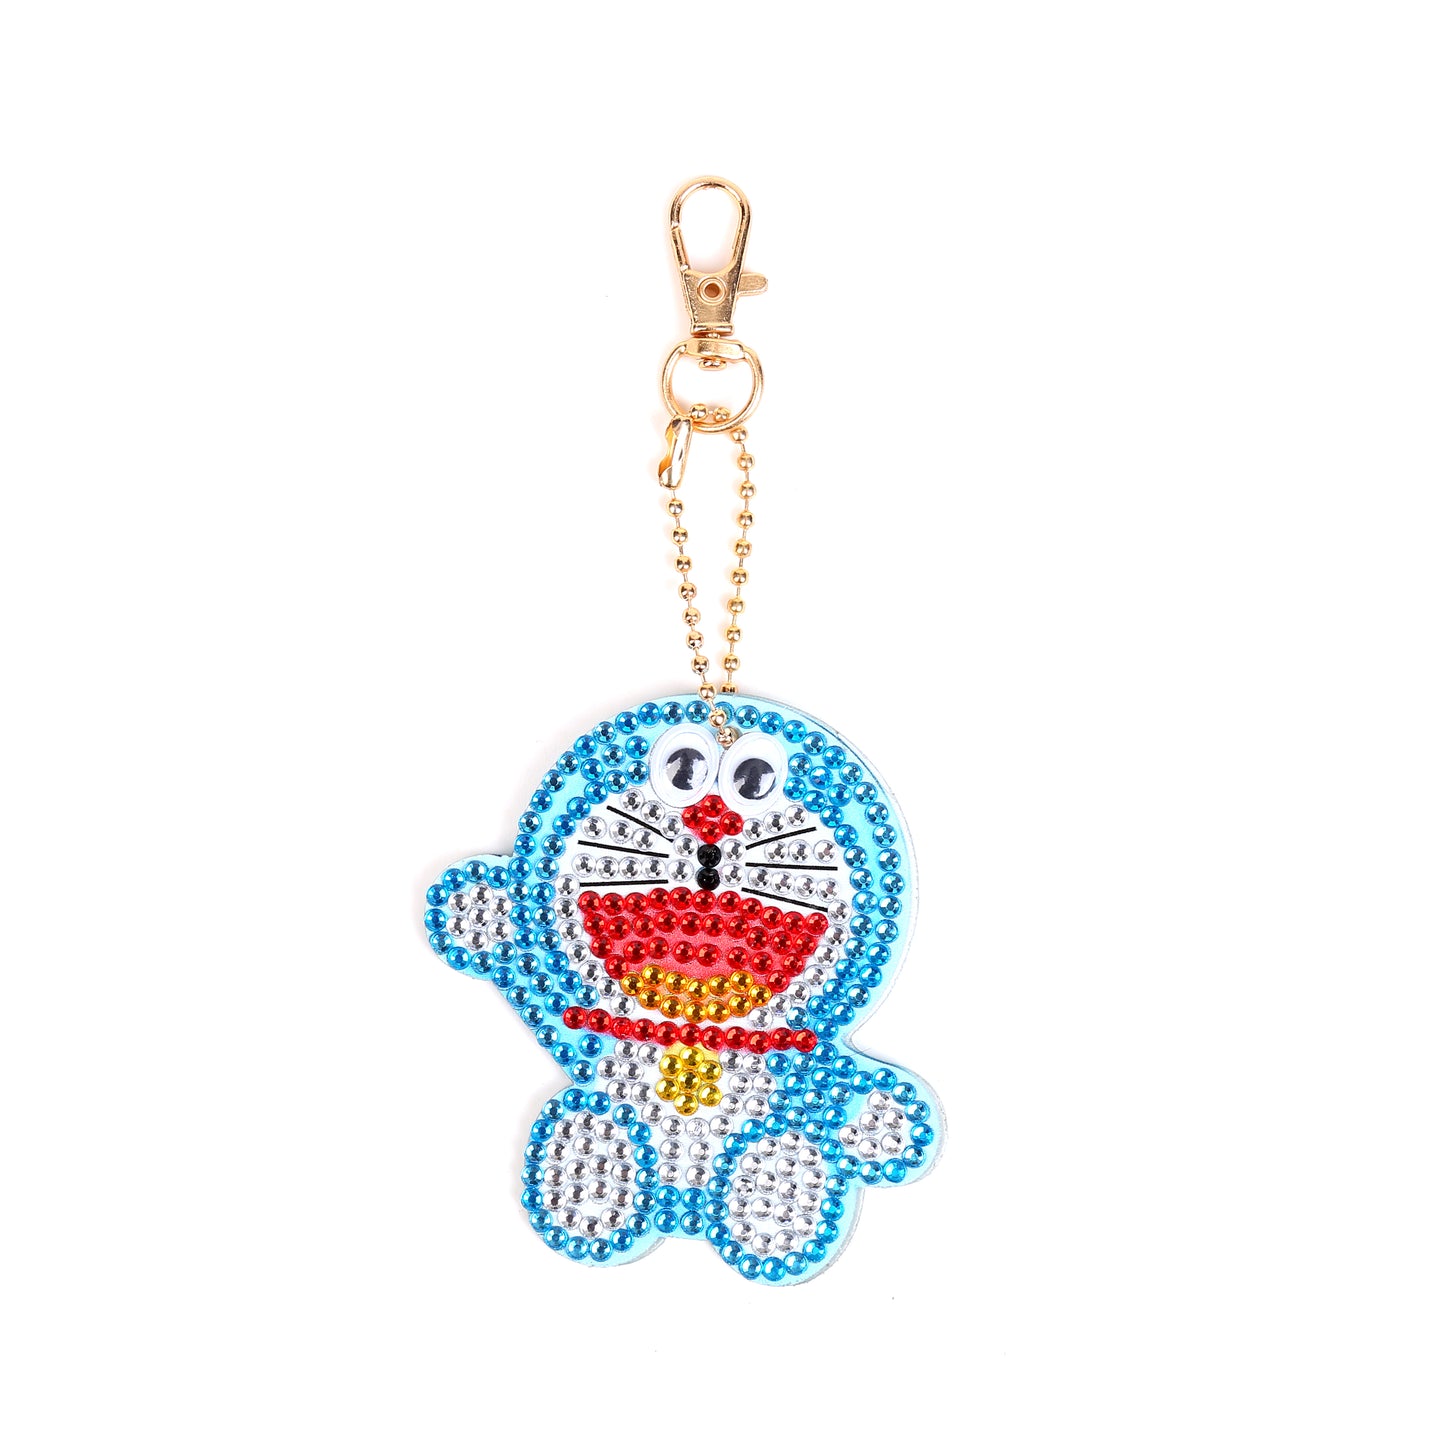 5pcs DIY Doraemon Sets Special Shaped Full Drill Diamond Painting Key Chain with Key Ring Jewelry Gifts for Girl Bags